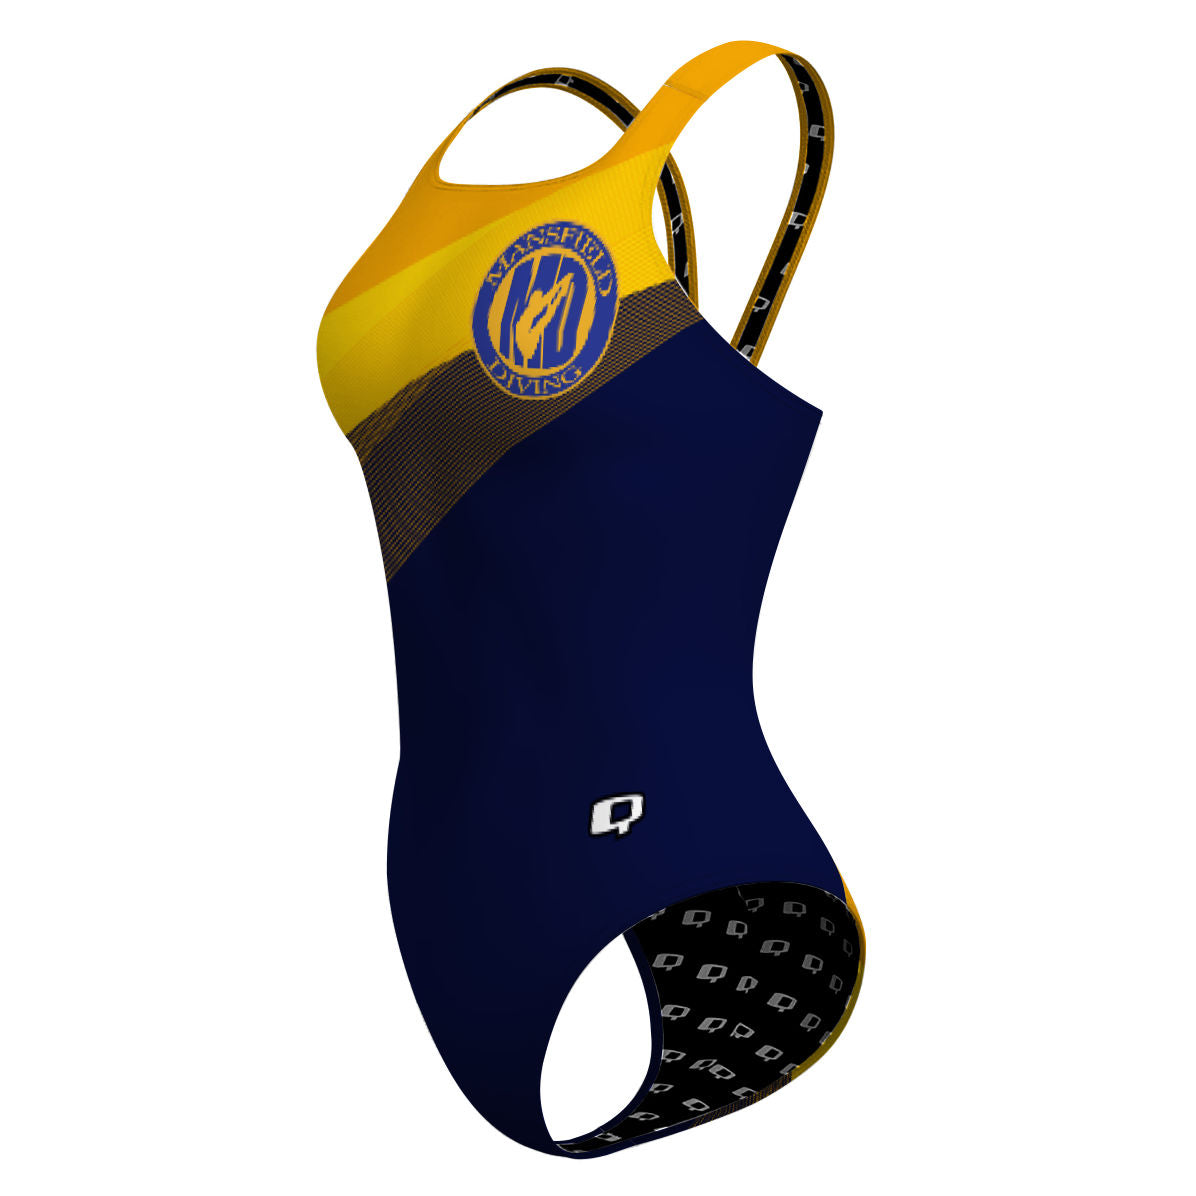 Mansfield Diving 21 V1 - Classic Strap